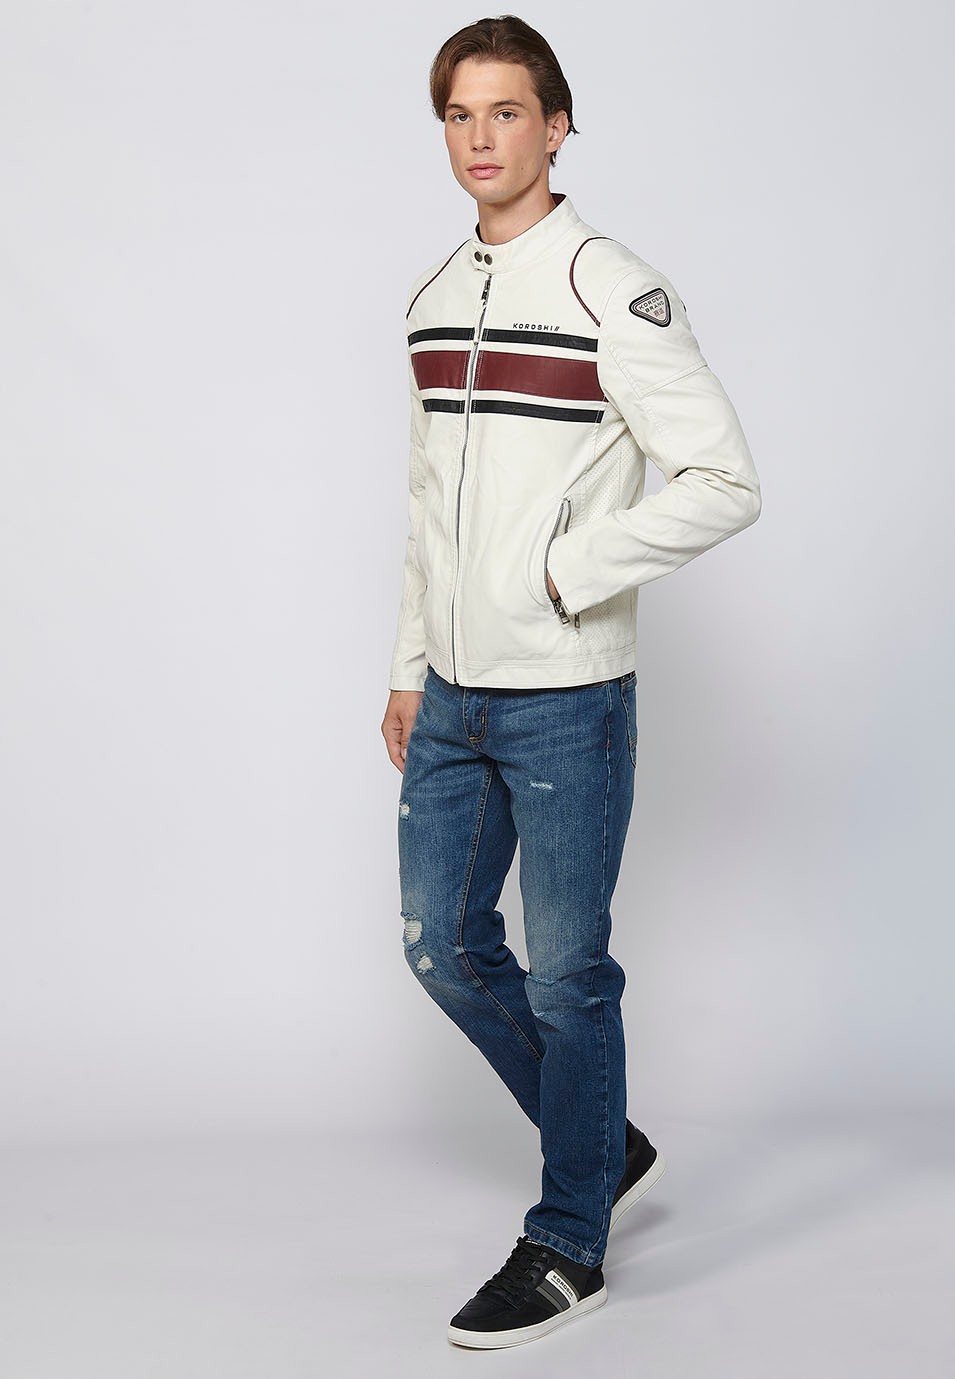 Long-sleeved jacket with round neck and front zipper closure and details on the sleeves in Ecru for Men